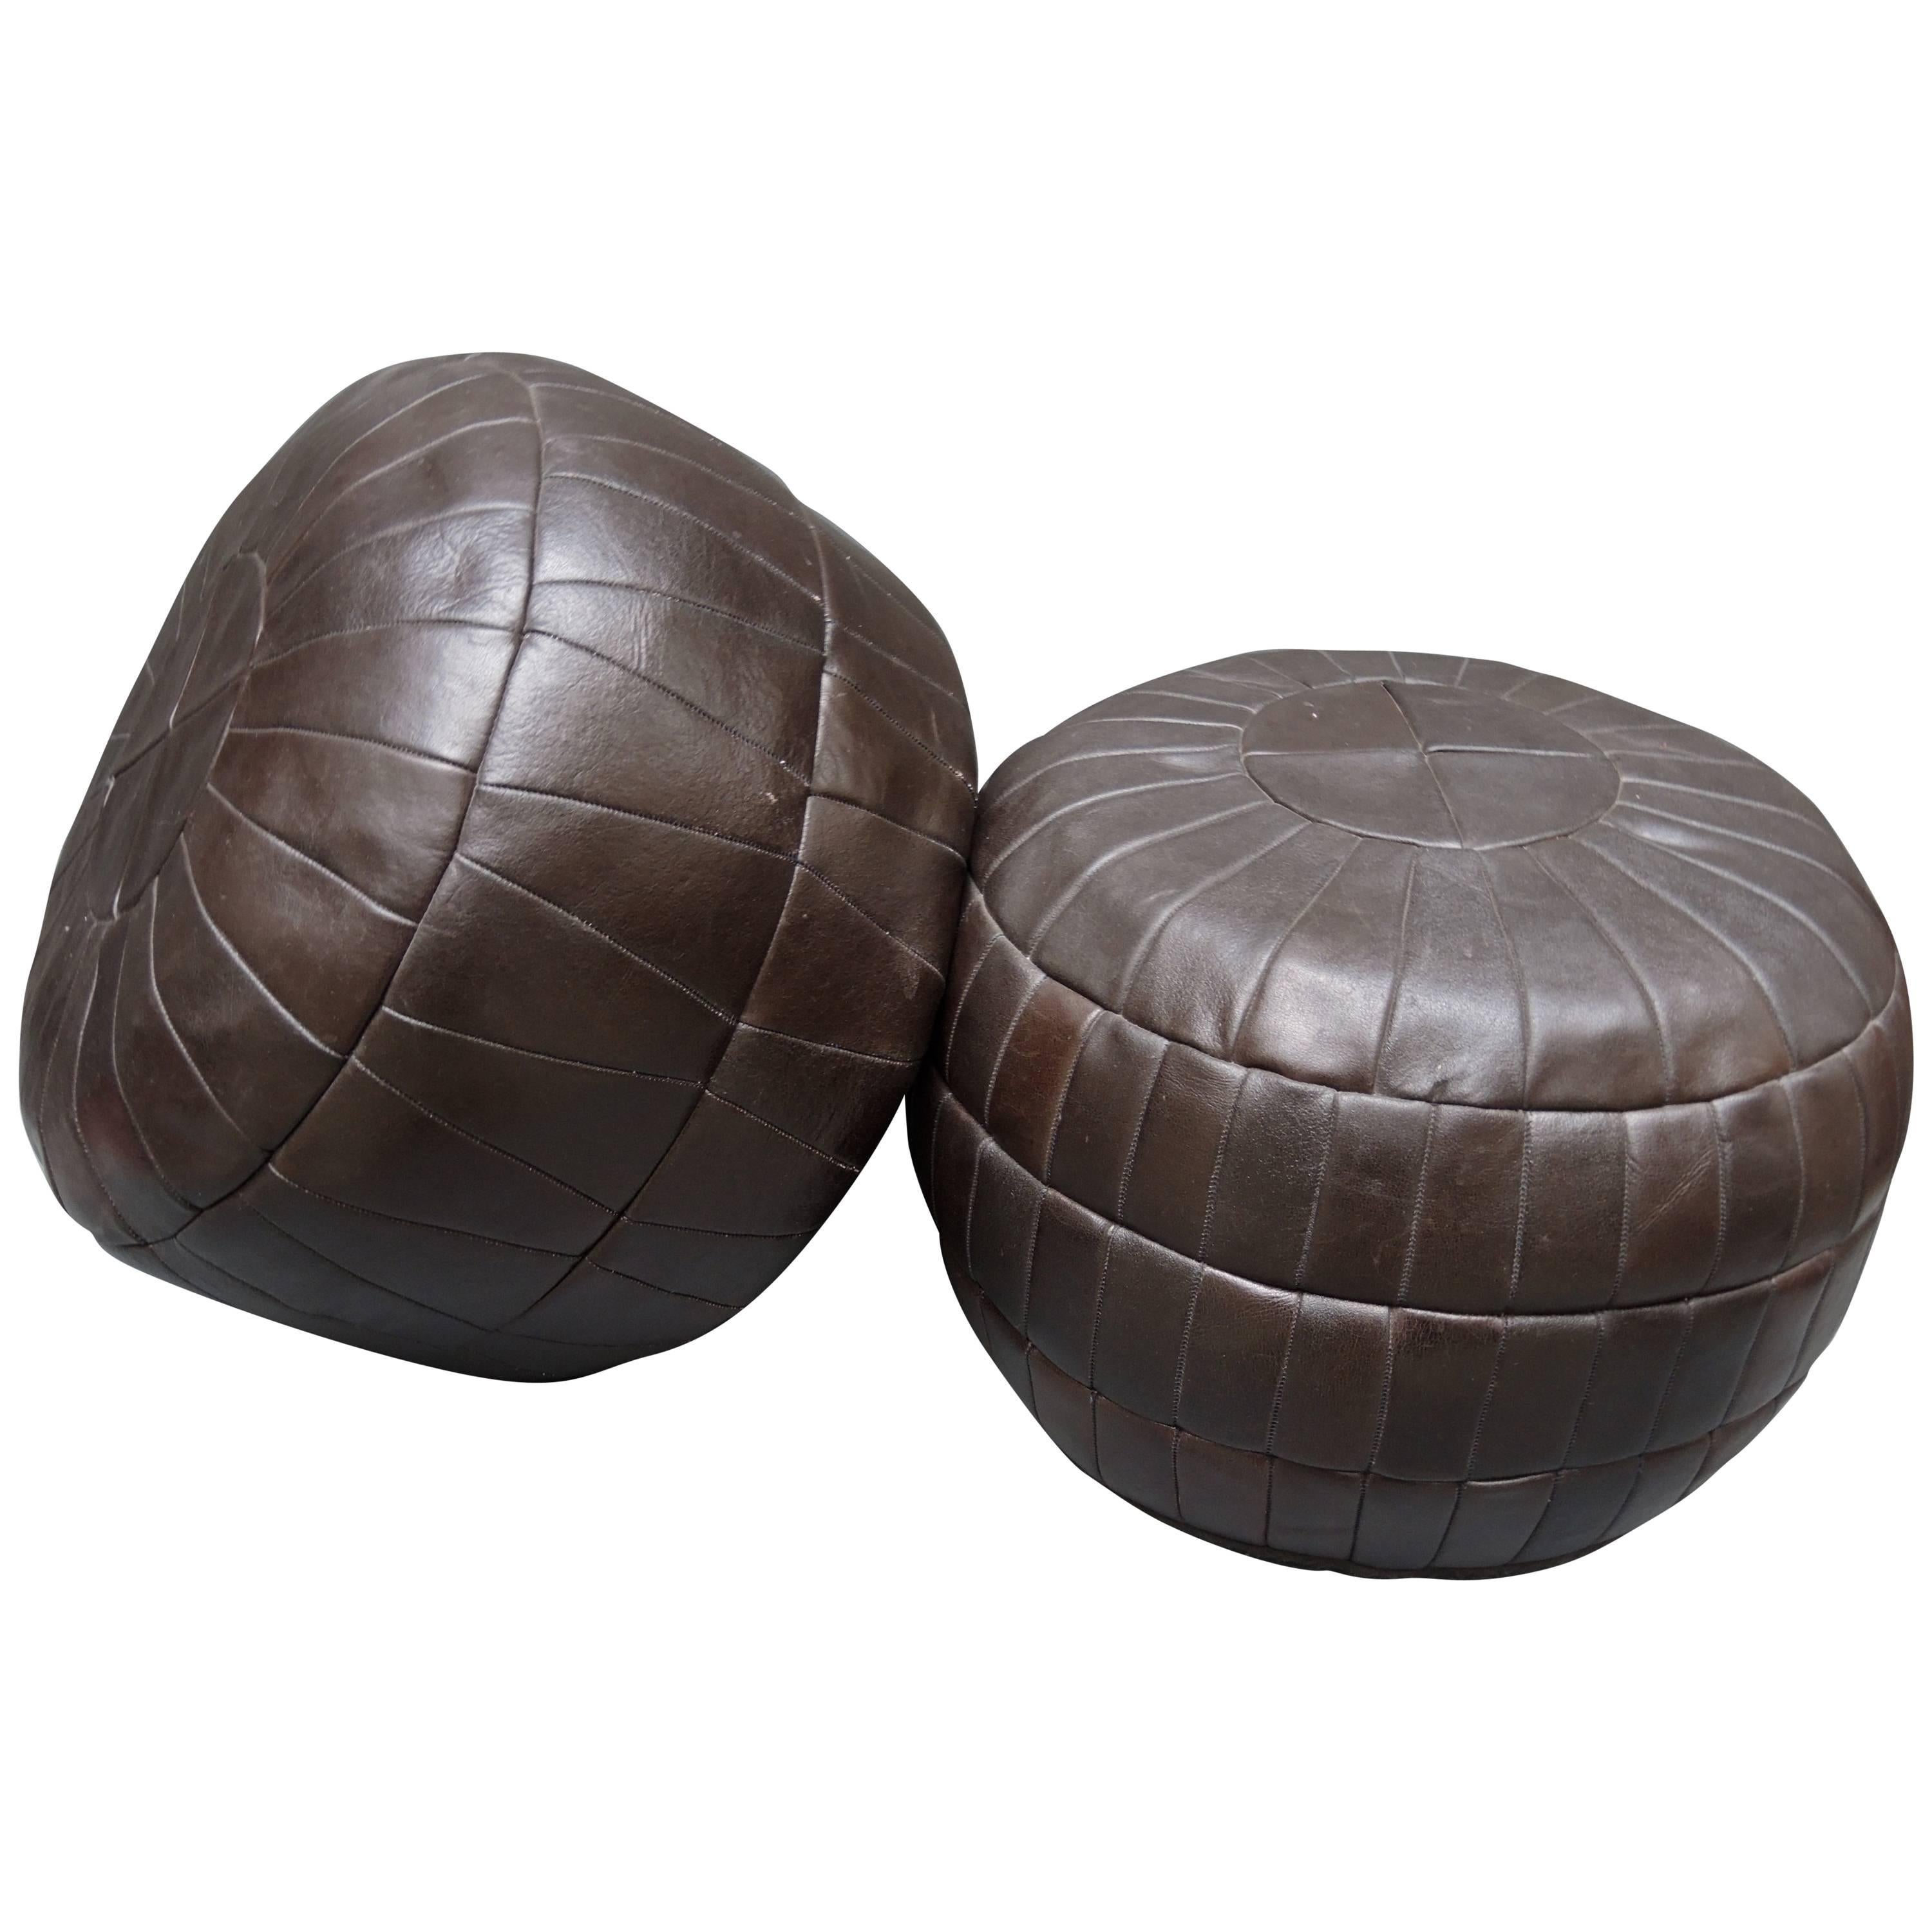 Pair of 1960's Vintage Chocolate Brown Leather Ottomans